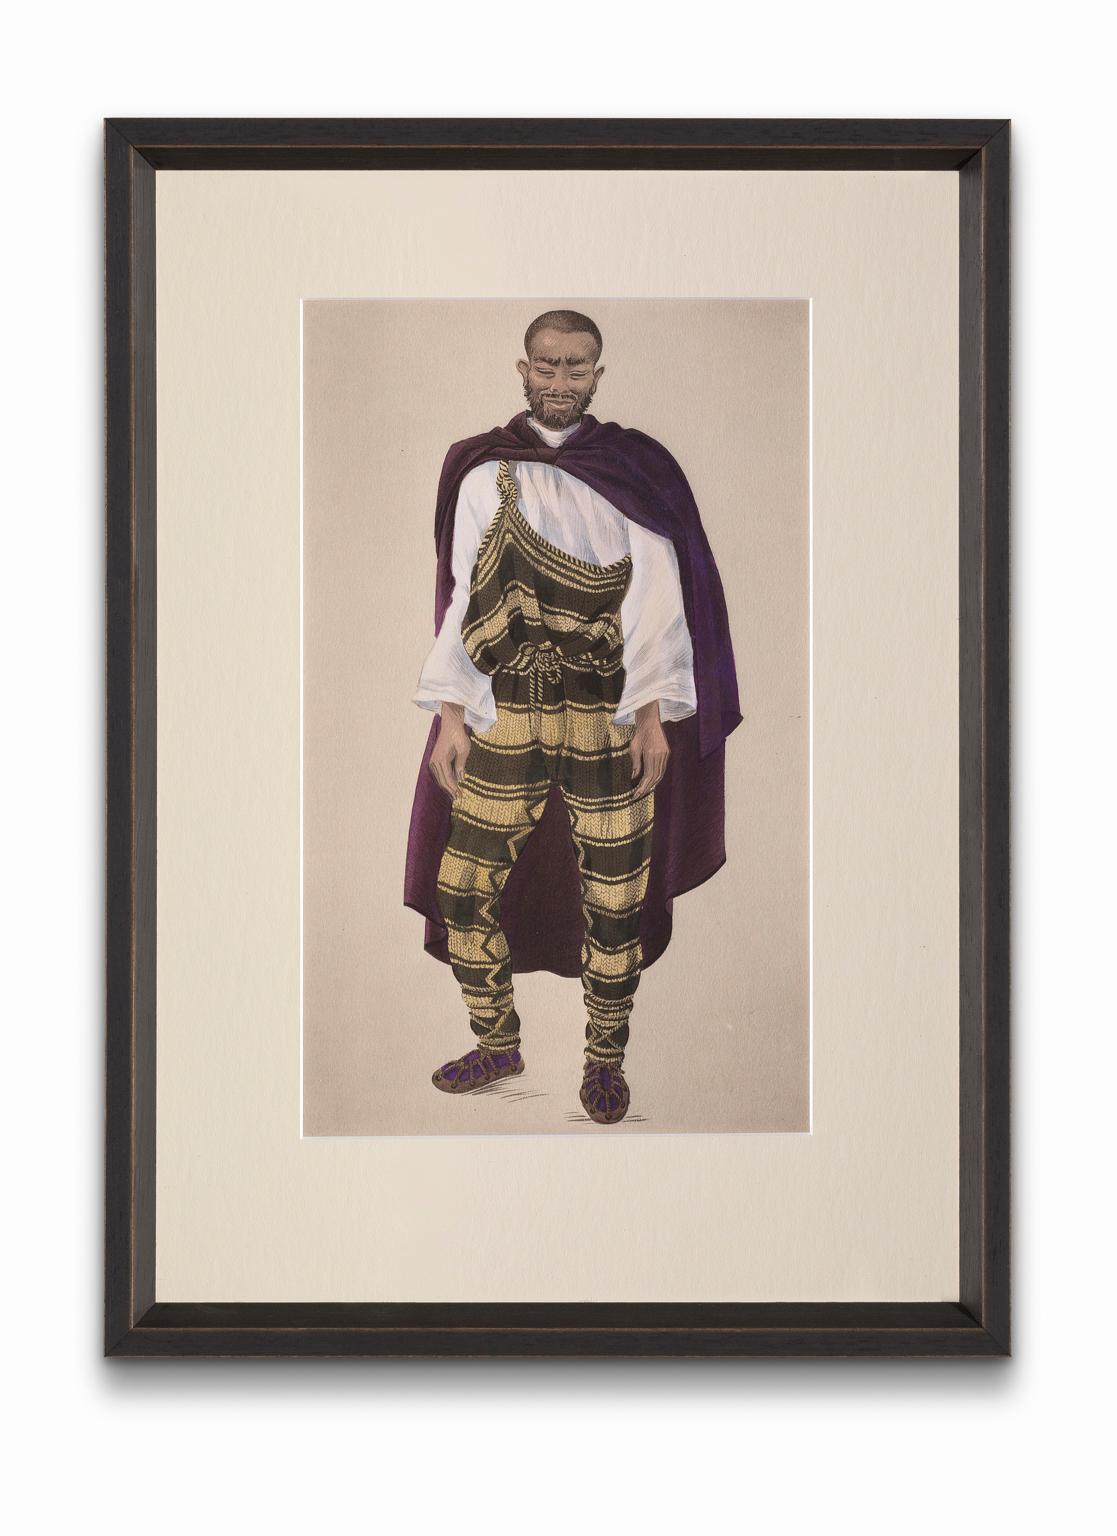 Jean Besancenot - "Man of The Ouanergui Carrying the Tabbane" from  "Costumes of Morocco" For Sale at 1stDibs